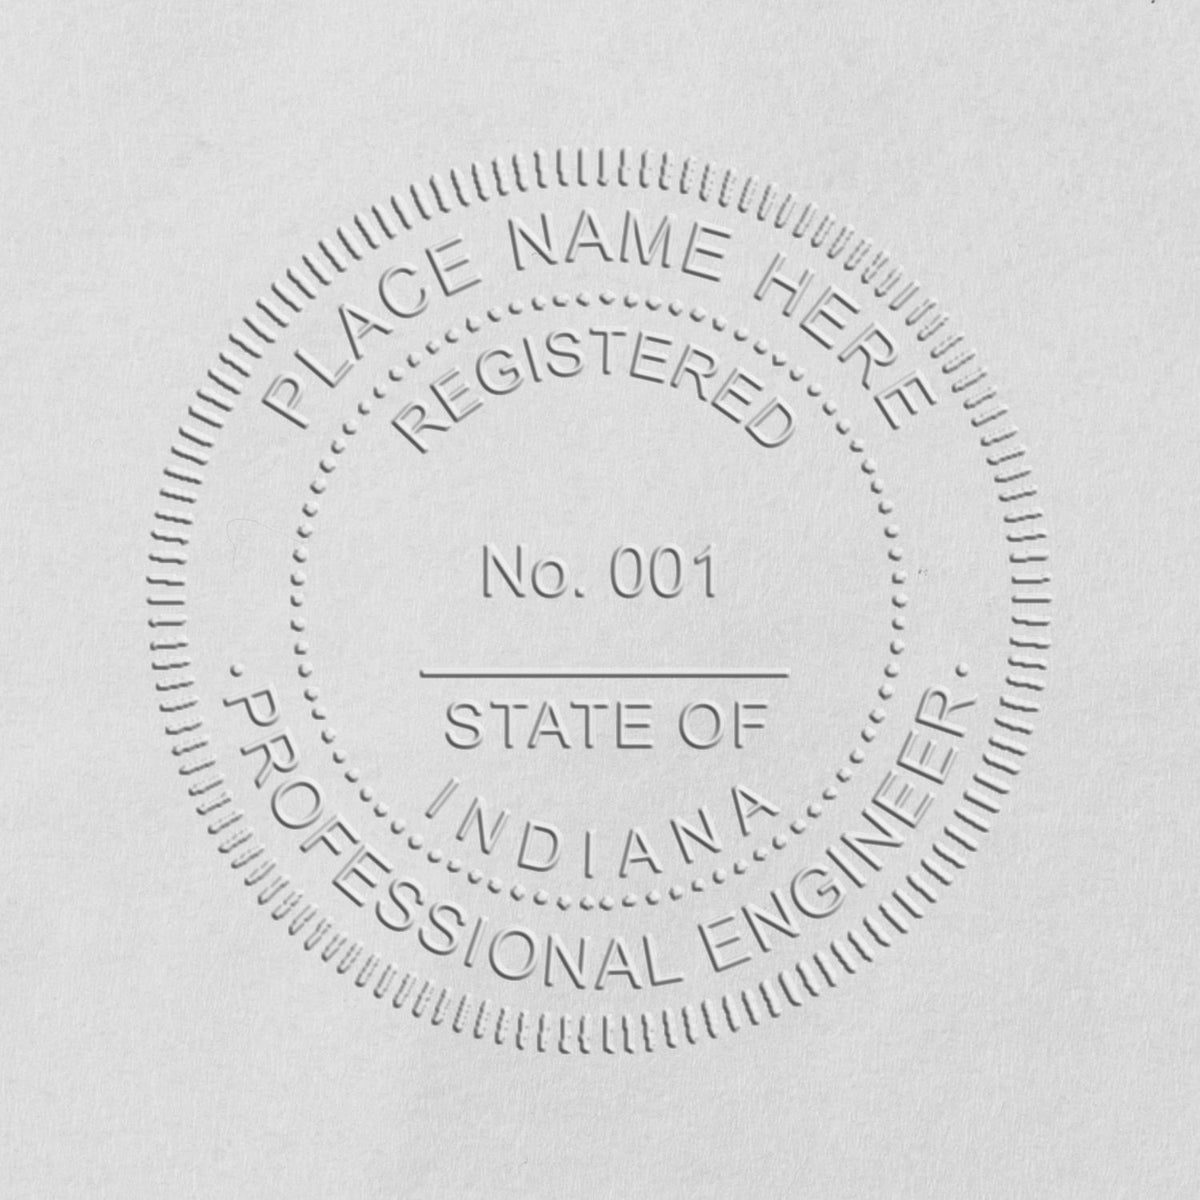 A photograph of the Long Reach Indiana PE Seal stamp impression reveals a vivid, professional image of the on paper.